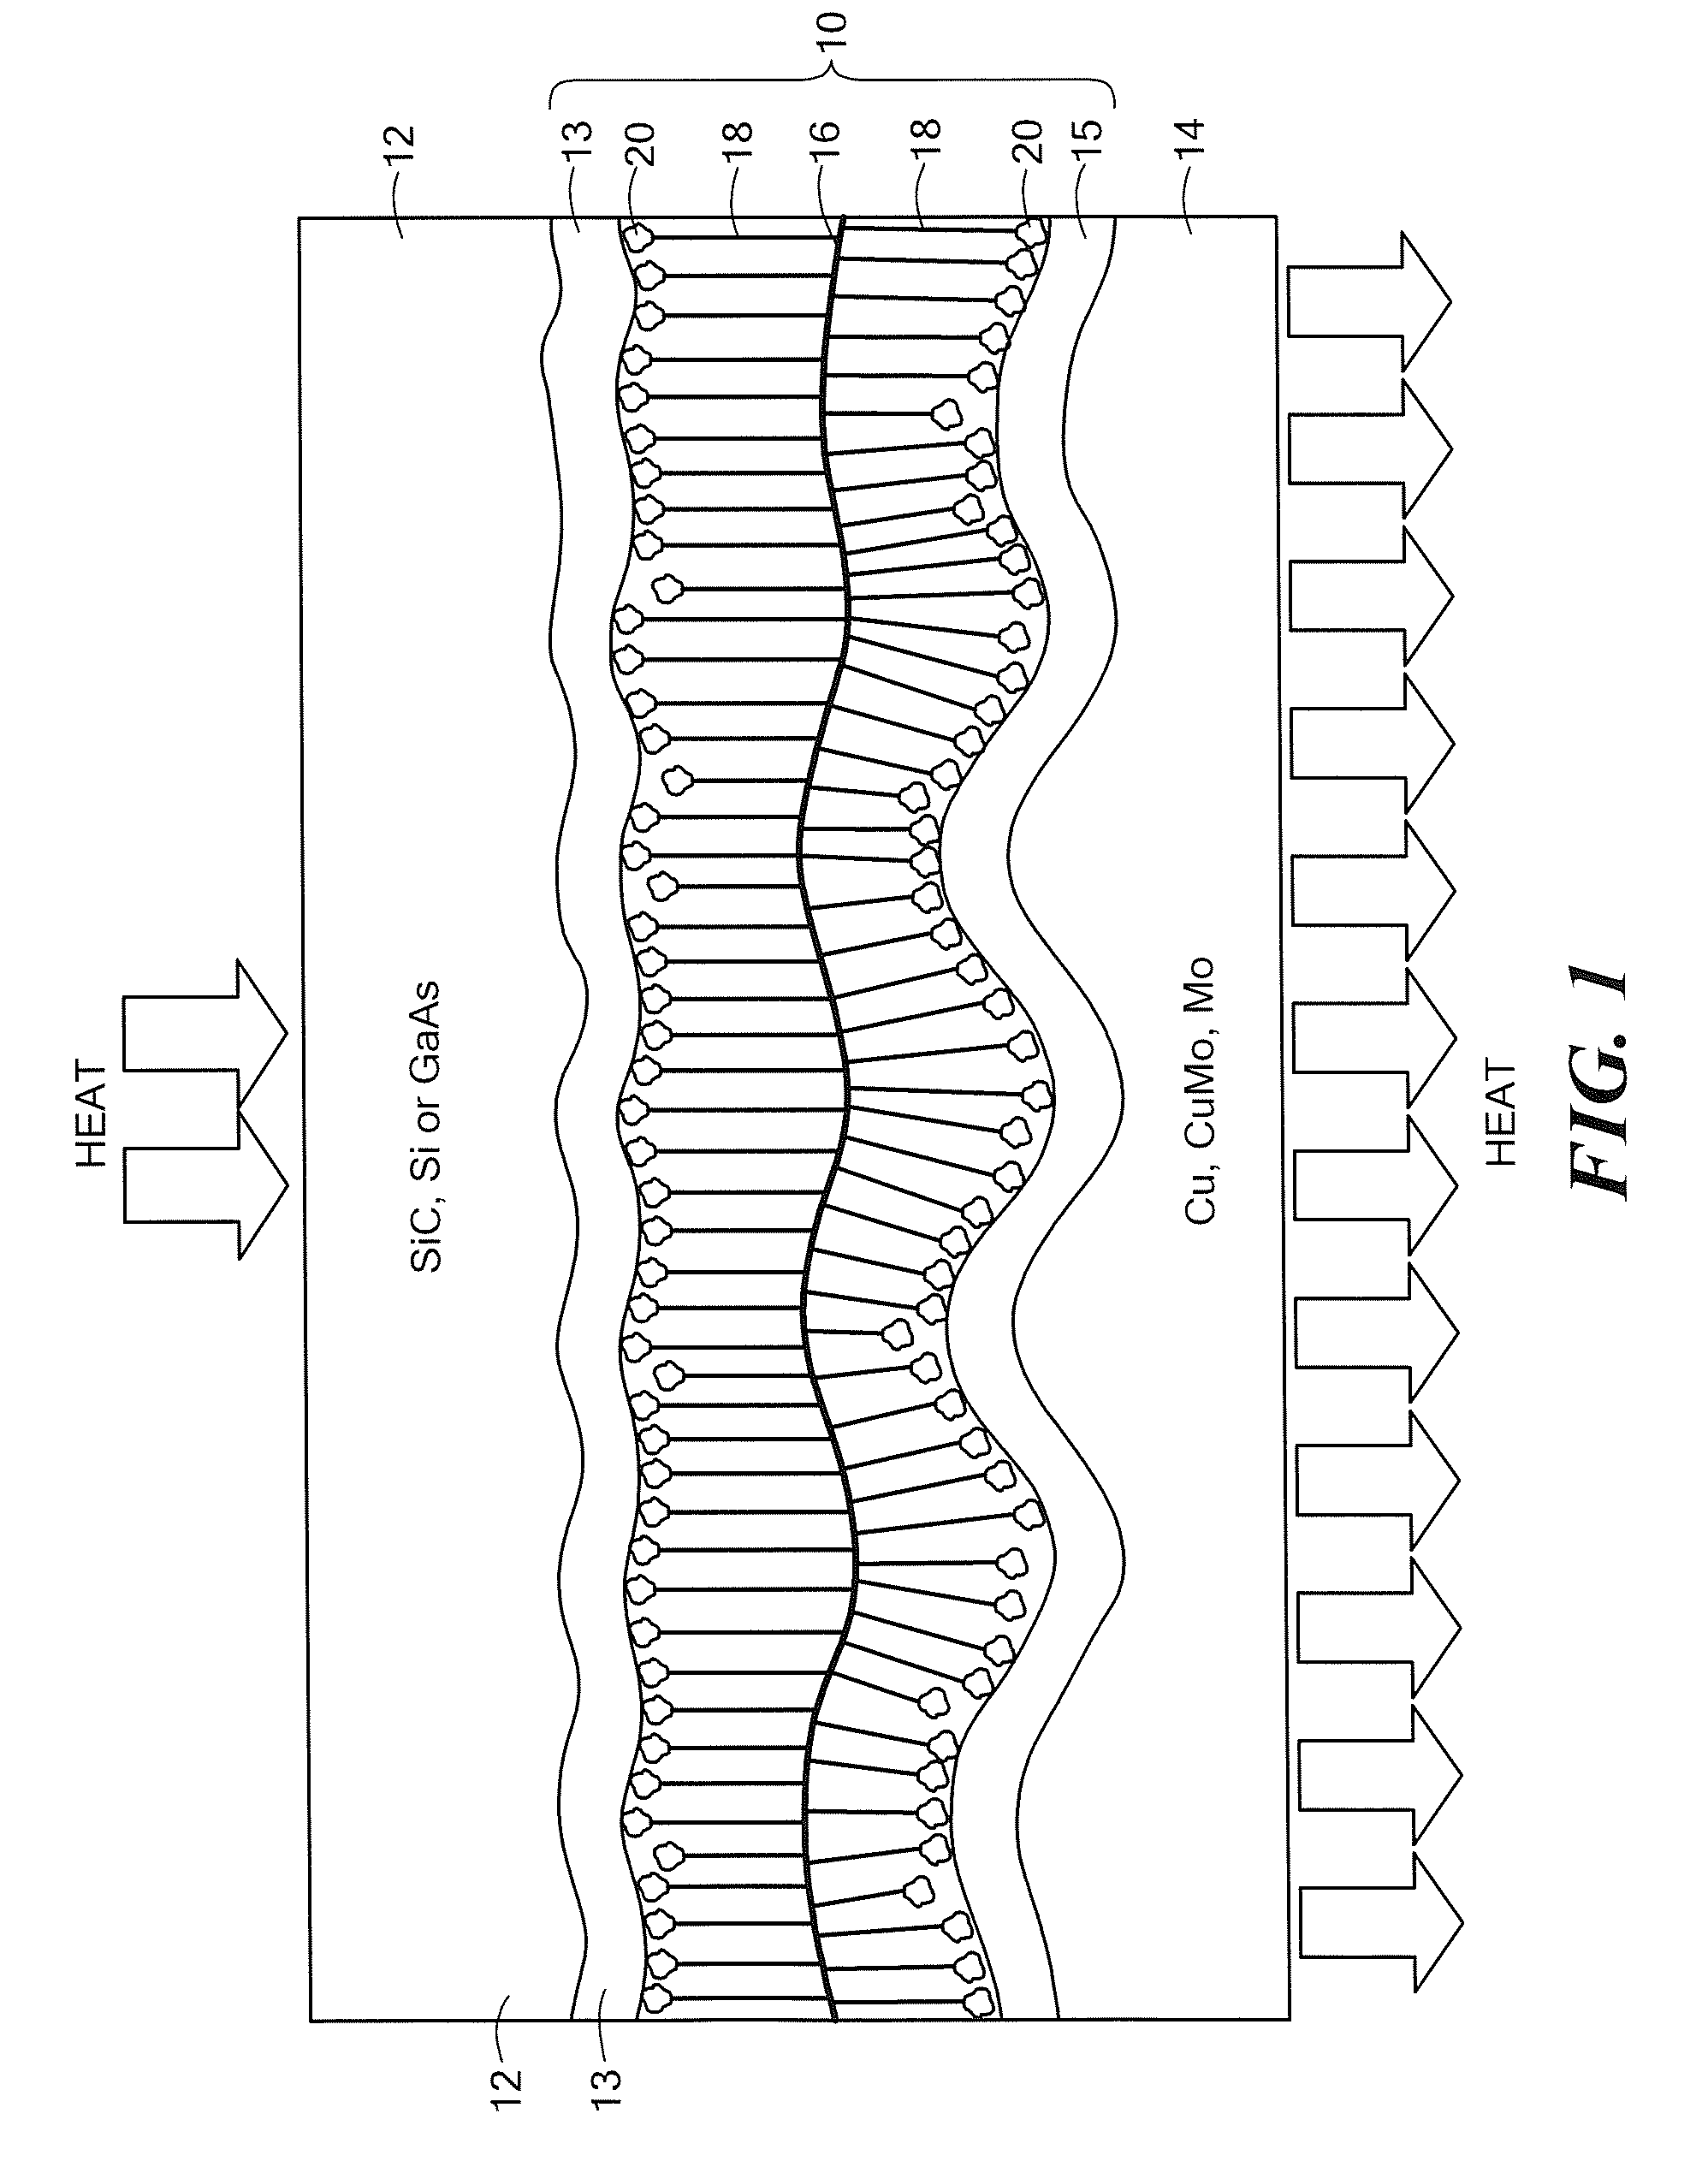 Nano-tube thermal interface structure